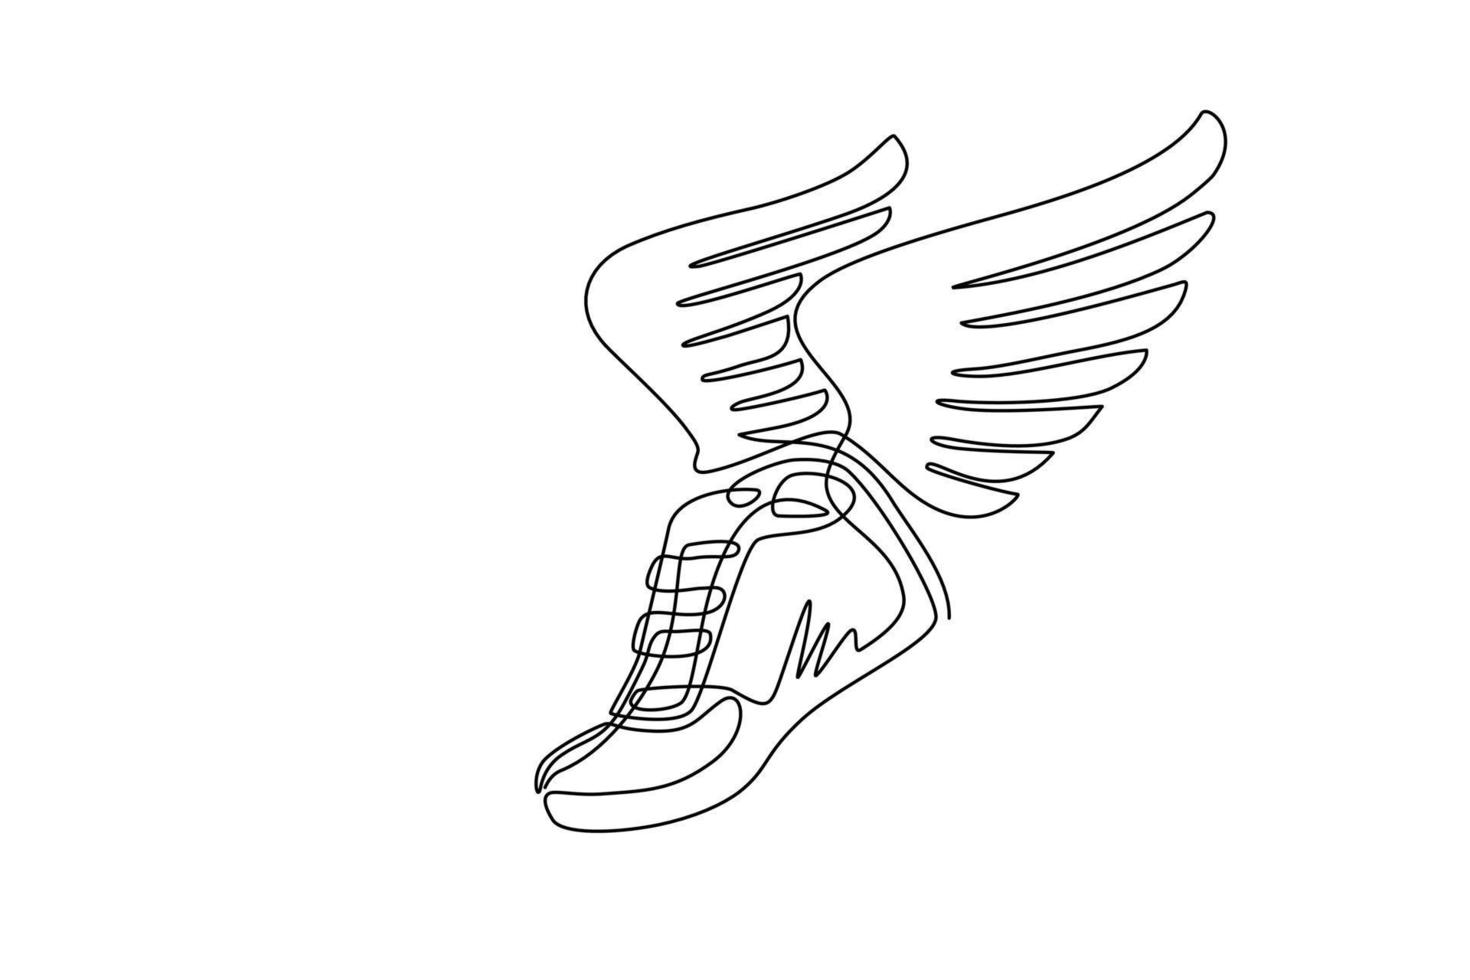 Continuous one line drawing running shoes with wings isolated. Stylized, minimalistic vintage design template element for print, label, badge or other symbol. Single line draw design vector graphic